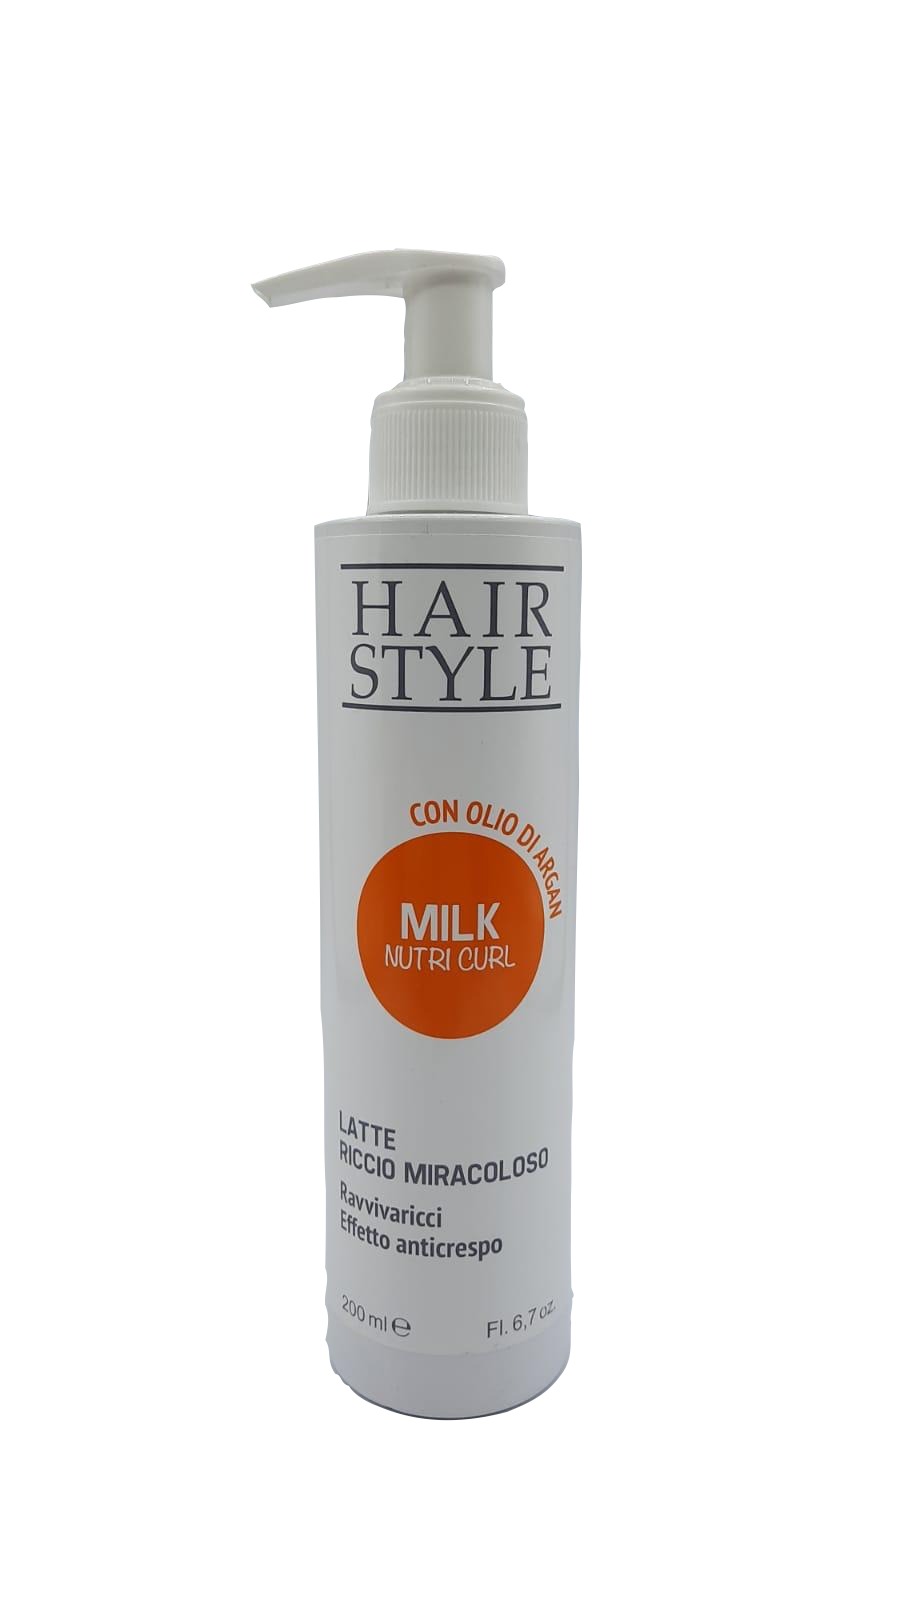 HAIRSTYLE LATTE RICCI MIRACOLOSO 200ML